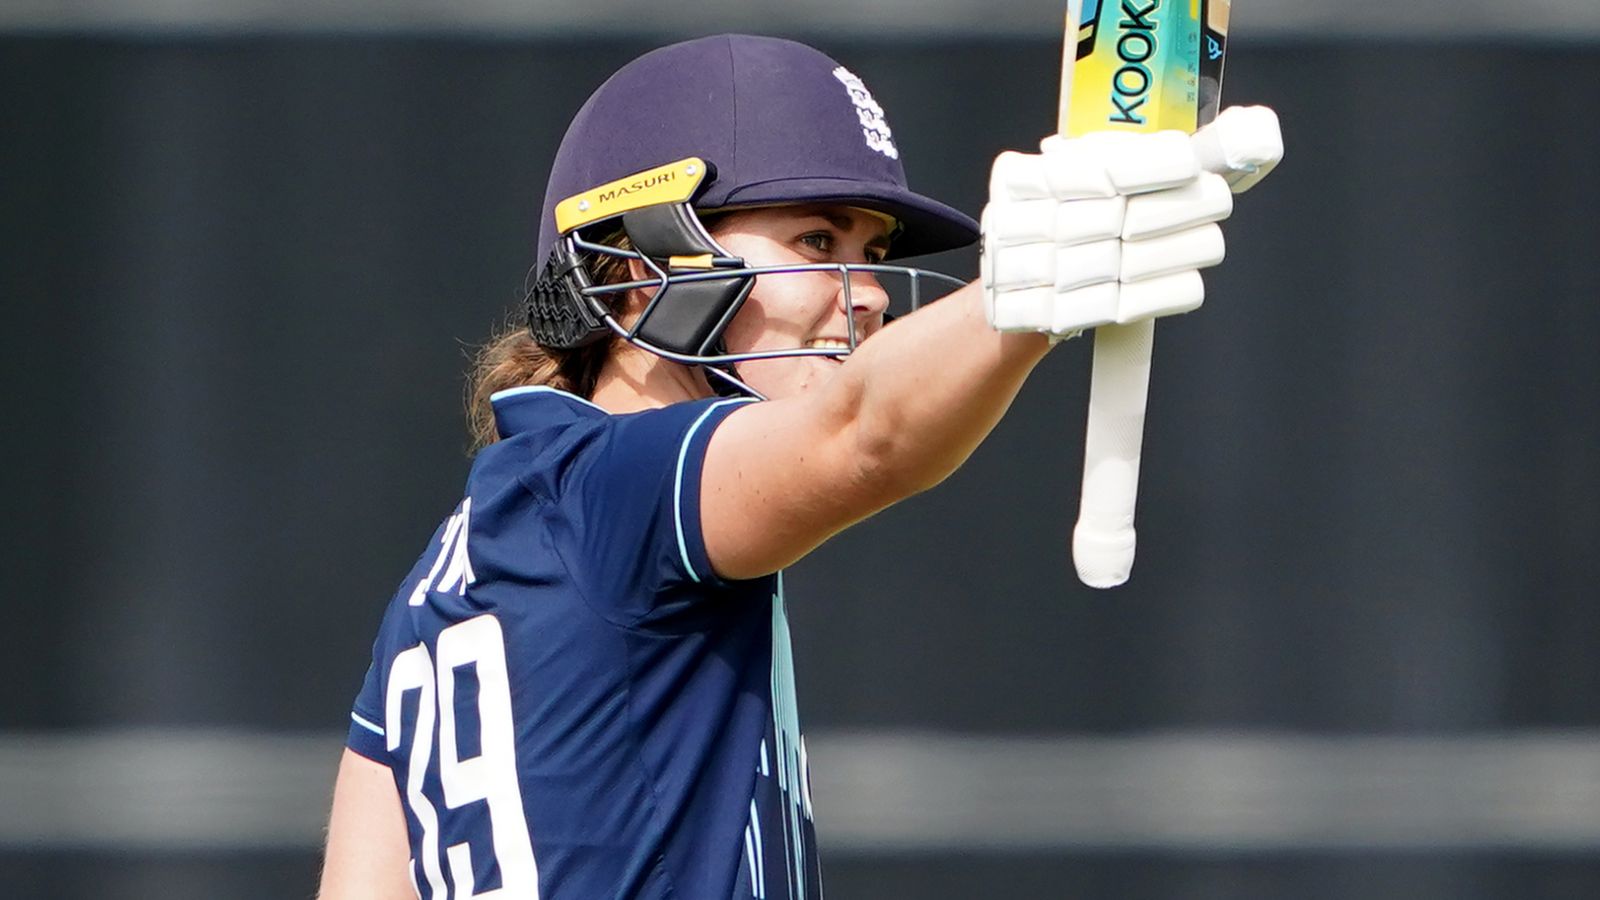 England Women beat West Indies by 142 runs in first ODI as Nat Sciver scores 90 and Charliie Dean takes four wickets